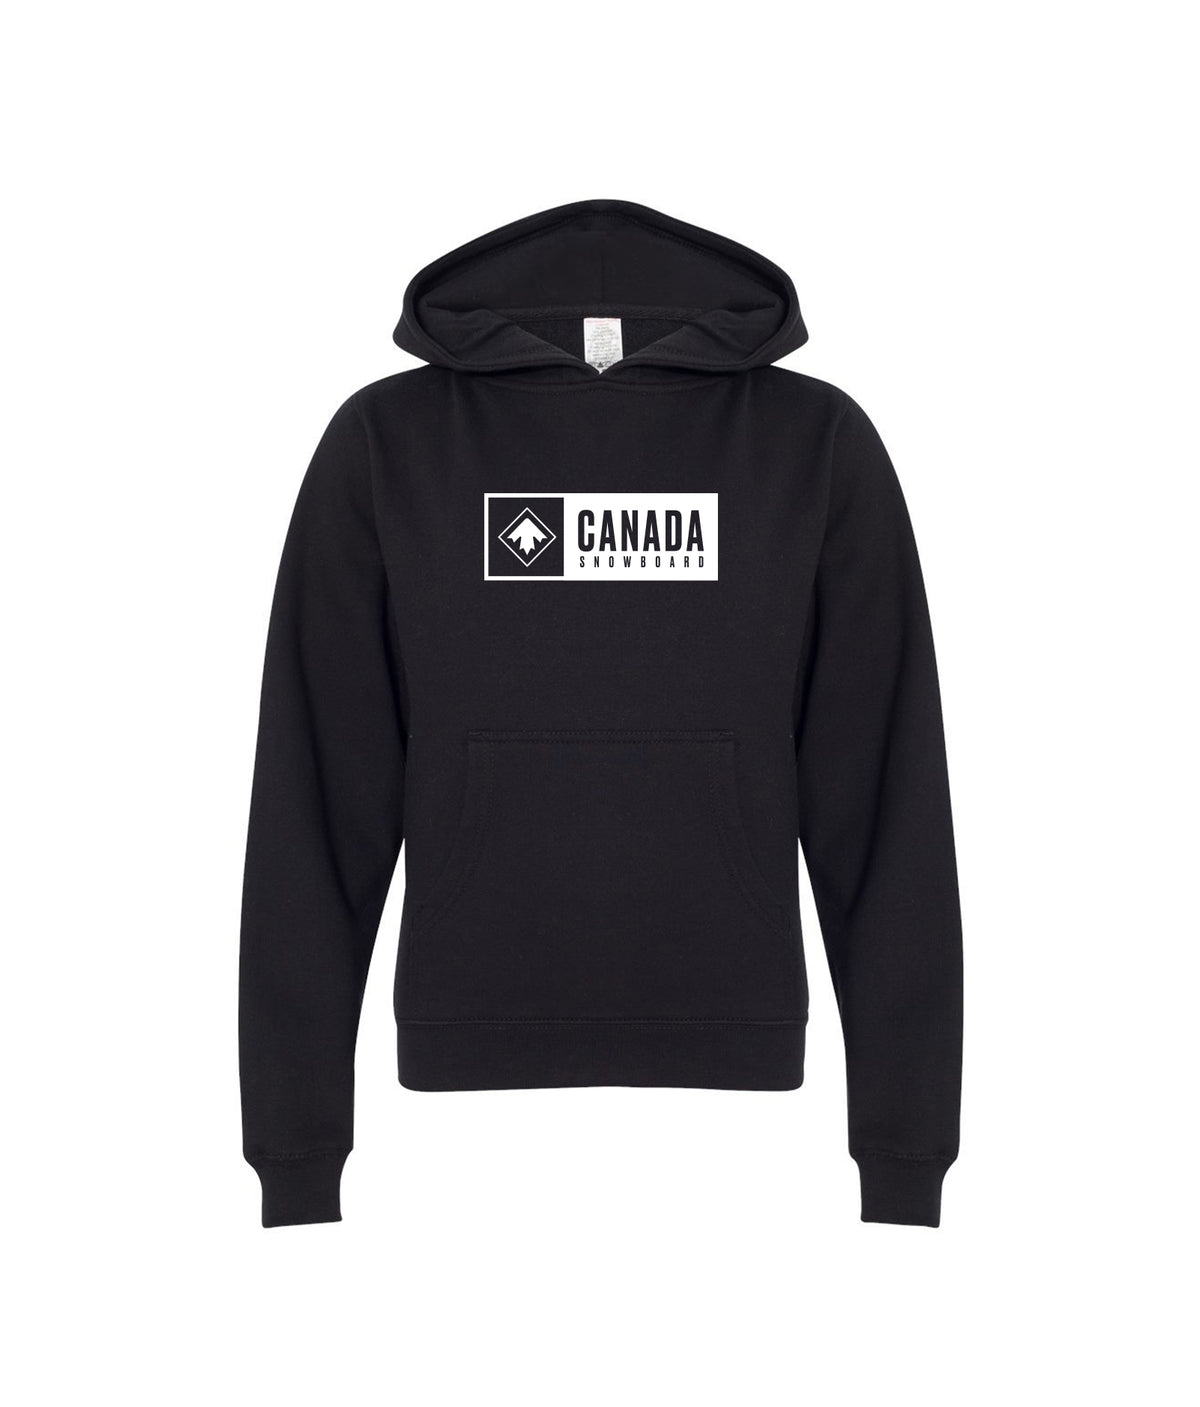 CS YOUTH MIDWEIGHT HOODIE